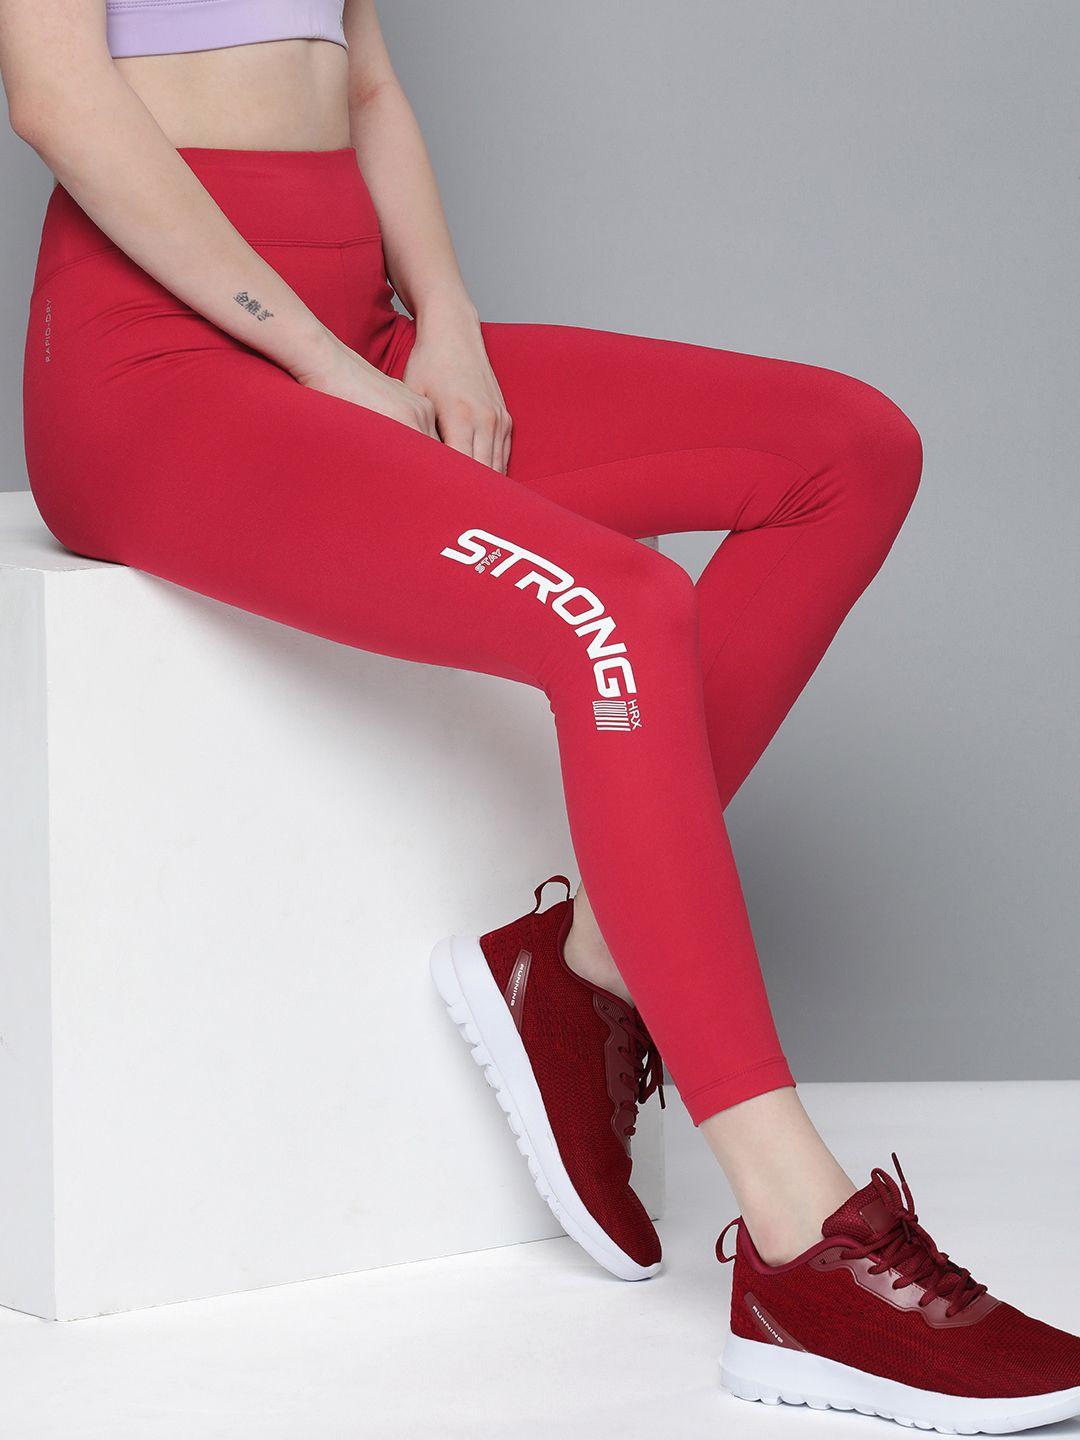 hrx by hrithik roshan red rapid-dry skinny fit training tights